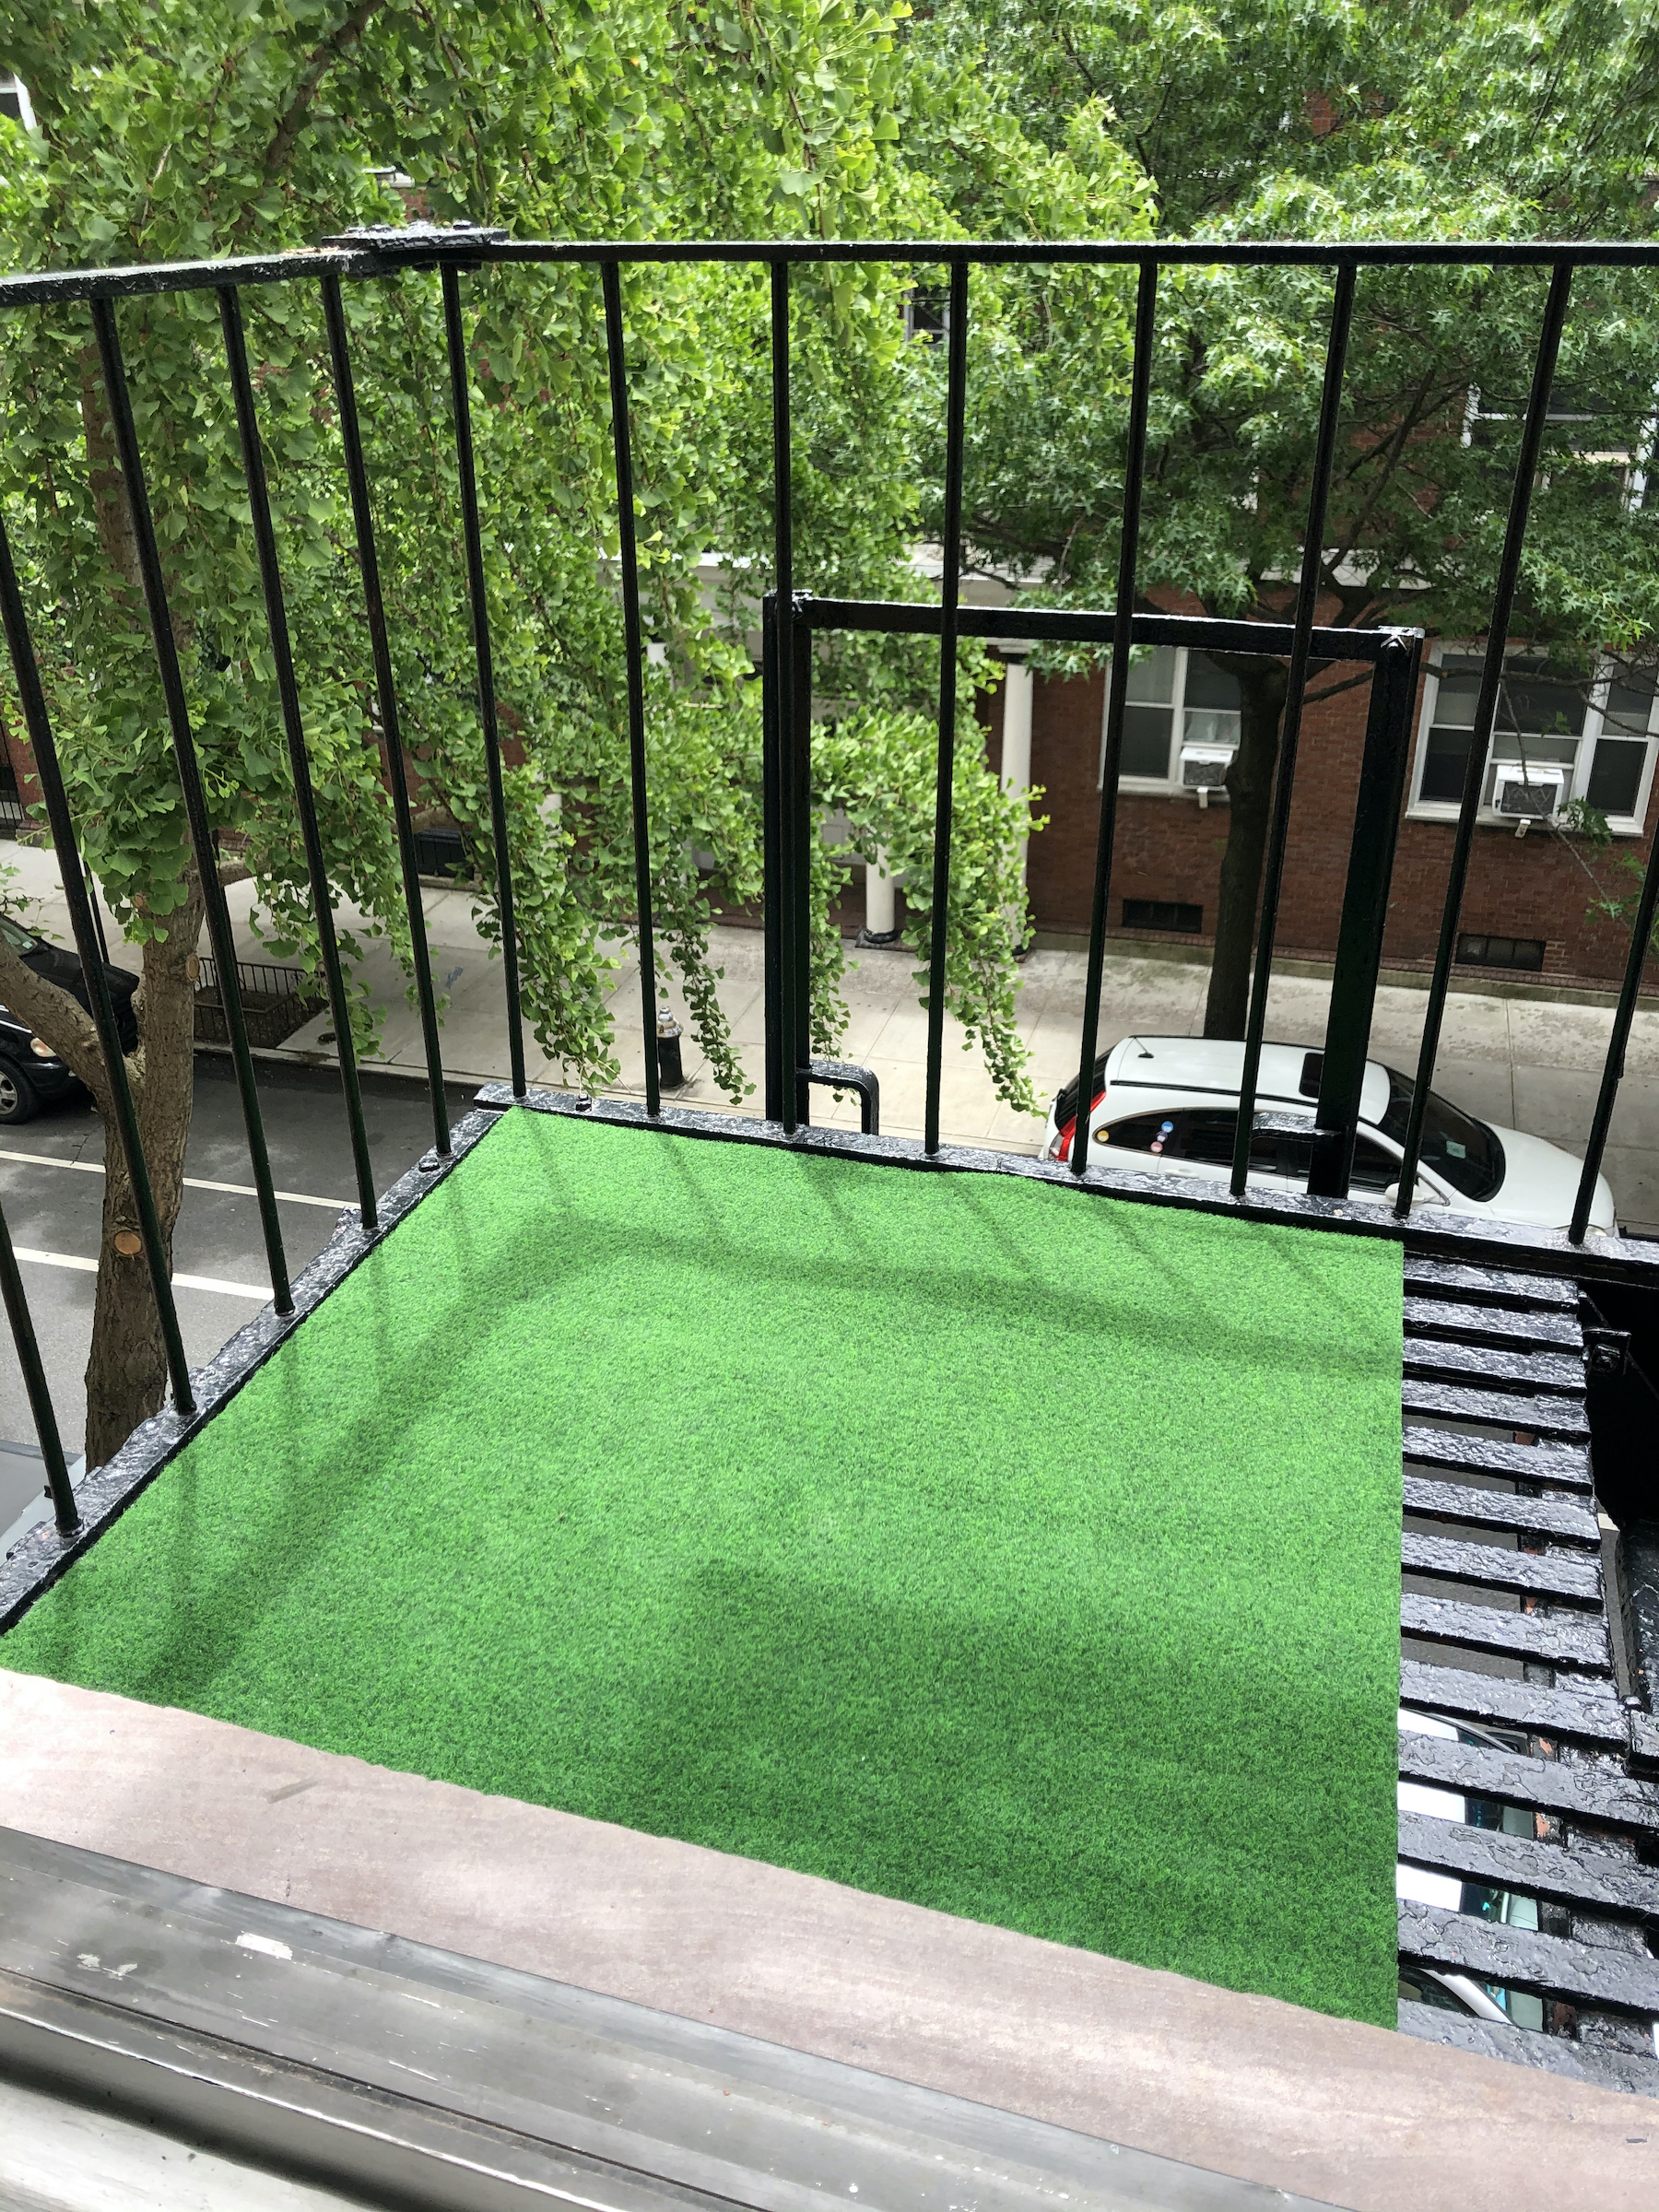 Turf on the fire escape